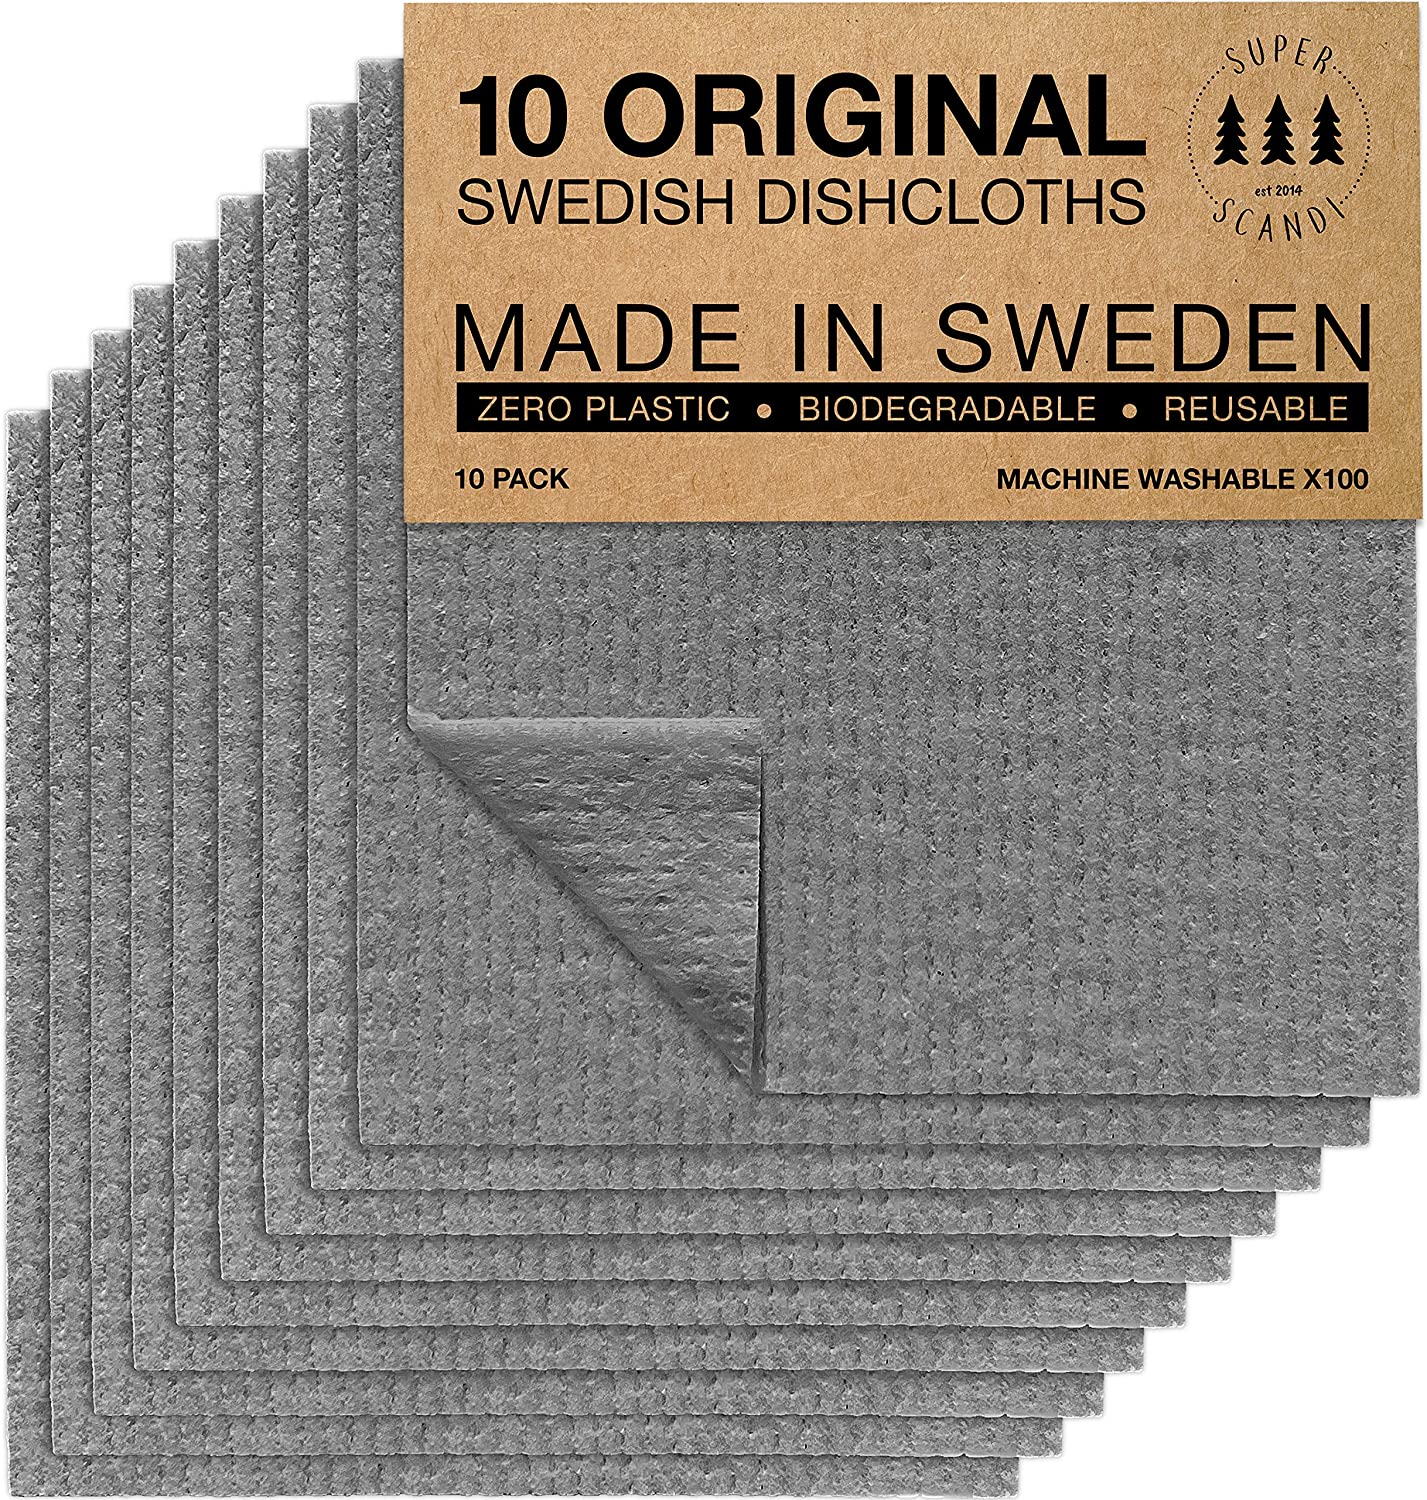 Wowables, Swedish Dish Cloths on a Roll, Reusable & Biodegradable Paper  Towels, 30 Count Roll, 2 PACK